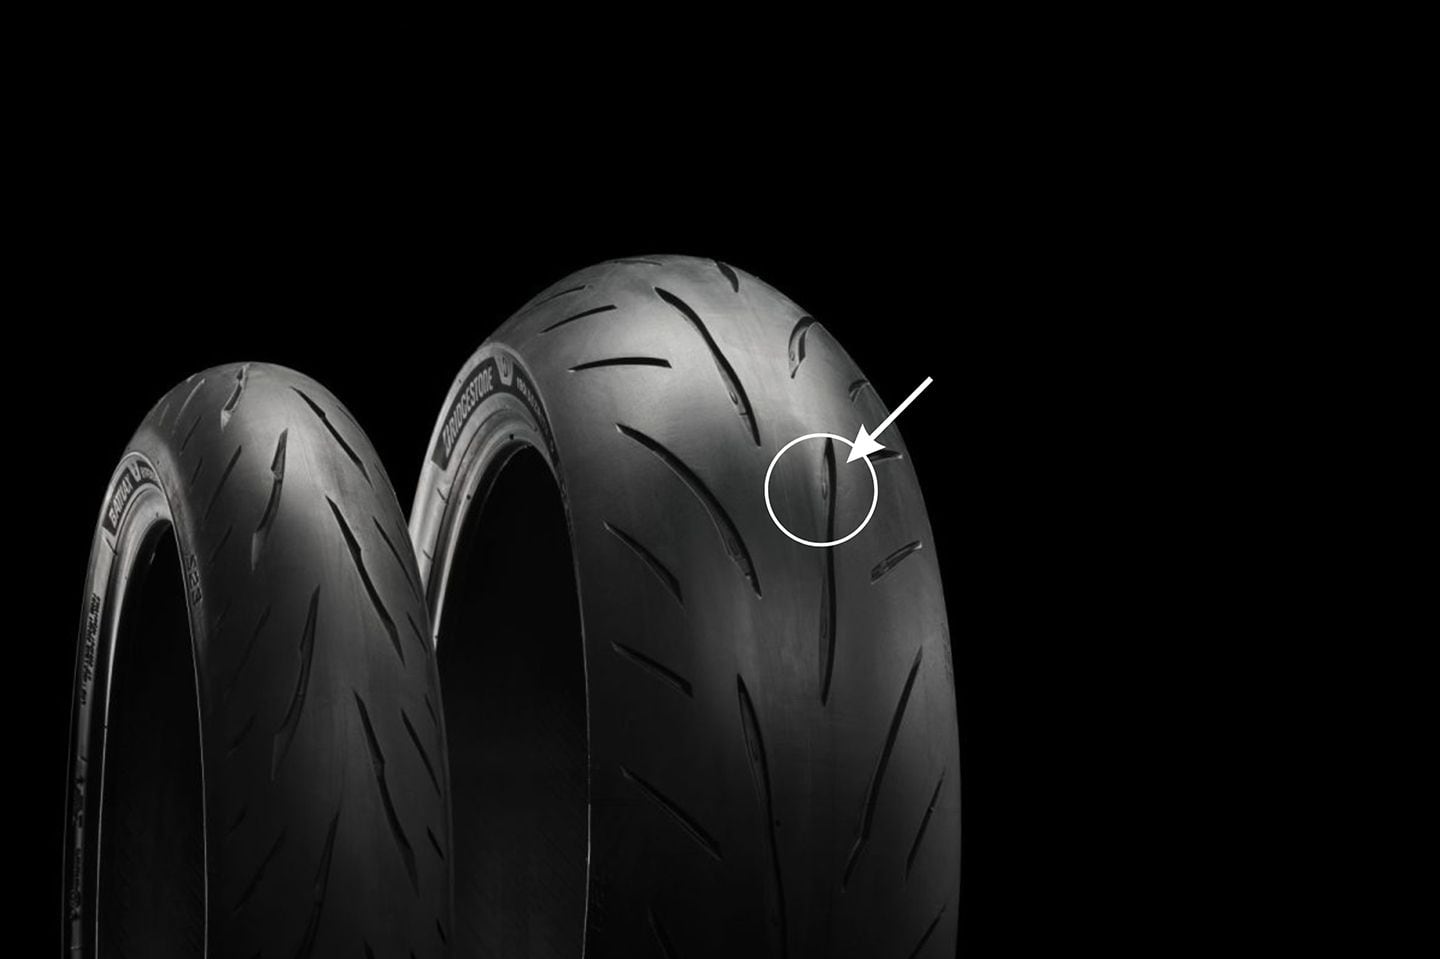 Wet-weather performance is improved thanks to the addition of Bridgestone’s Pulse Groove technology on the rear tire. The reshaped groove with center deflector (circled) accelerates water through the footprint better compared to a traditional groove.